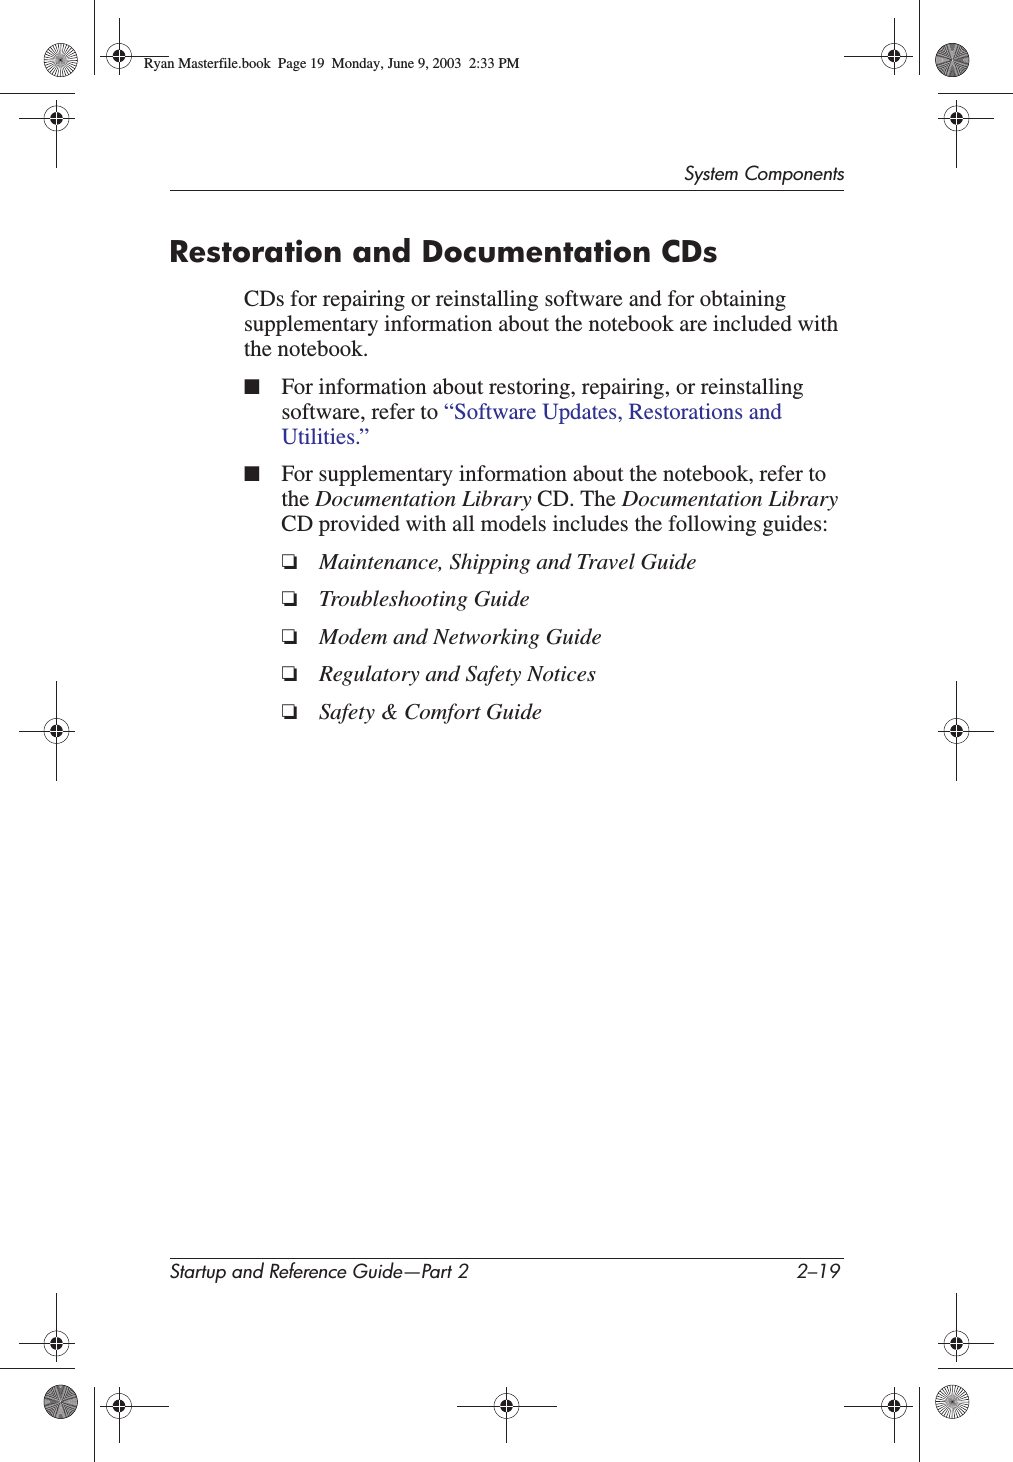 System ComponentsStartup and Reference Guide—Part 2 2–19Restoration and Documentation CDsCDs for repairing or reinstalling software and for obtaining supplementary information about the notebook are included with the notebook. ■For information about restoring, repairing, or reinstalling software, refer to “Software Updates, Restorations and Utilities.”■For supplementary information about the notebook, refer to the Documentation Library CD. The Documentation LibraryCD provided with all models includes the following guides:❏Maintenance, Shipping and Travel Guide❏Troubleshooting Guide❏Modem and Networking Guide❏Regulatory and Safety Notices❏Safety &amp; Comfort GuideRyan Masterfile.book  Page 19  Monday, June 9, 2003  2:33 PM